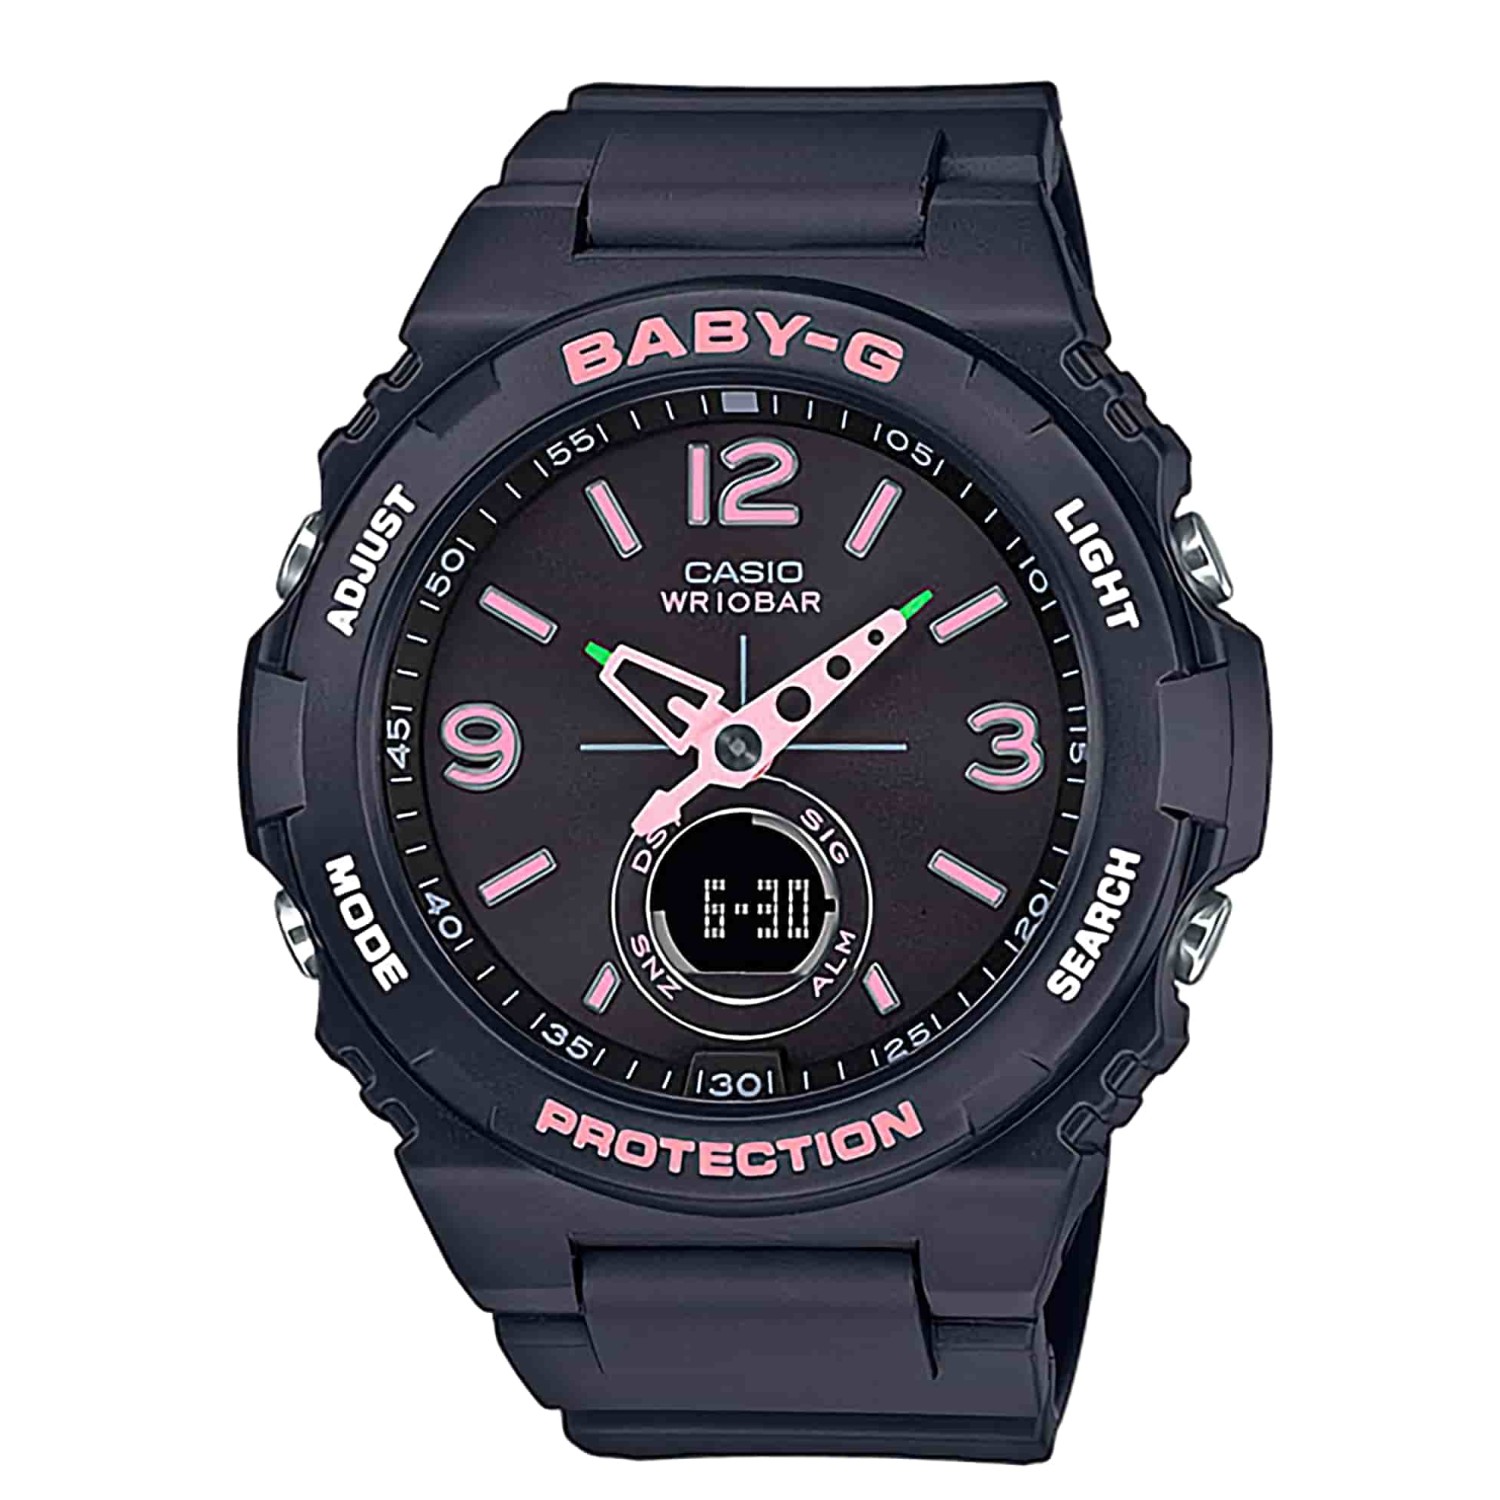 BGA260SC-1A Casio Baby-G Sports Watch. These new models for the summer outdoor and leisure scene are some of the latest additions to the BABY-G lineup of casual watches for active women.The base model is the BGA-260, whose design makes it fit right in whe